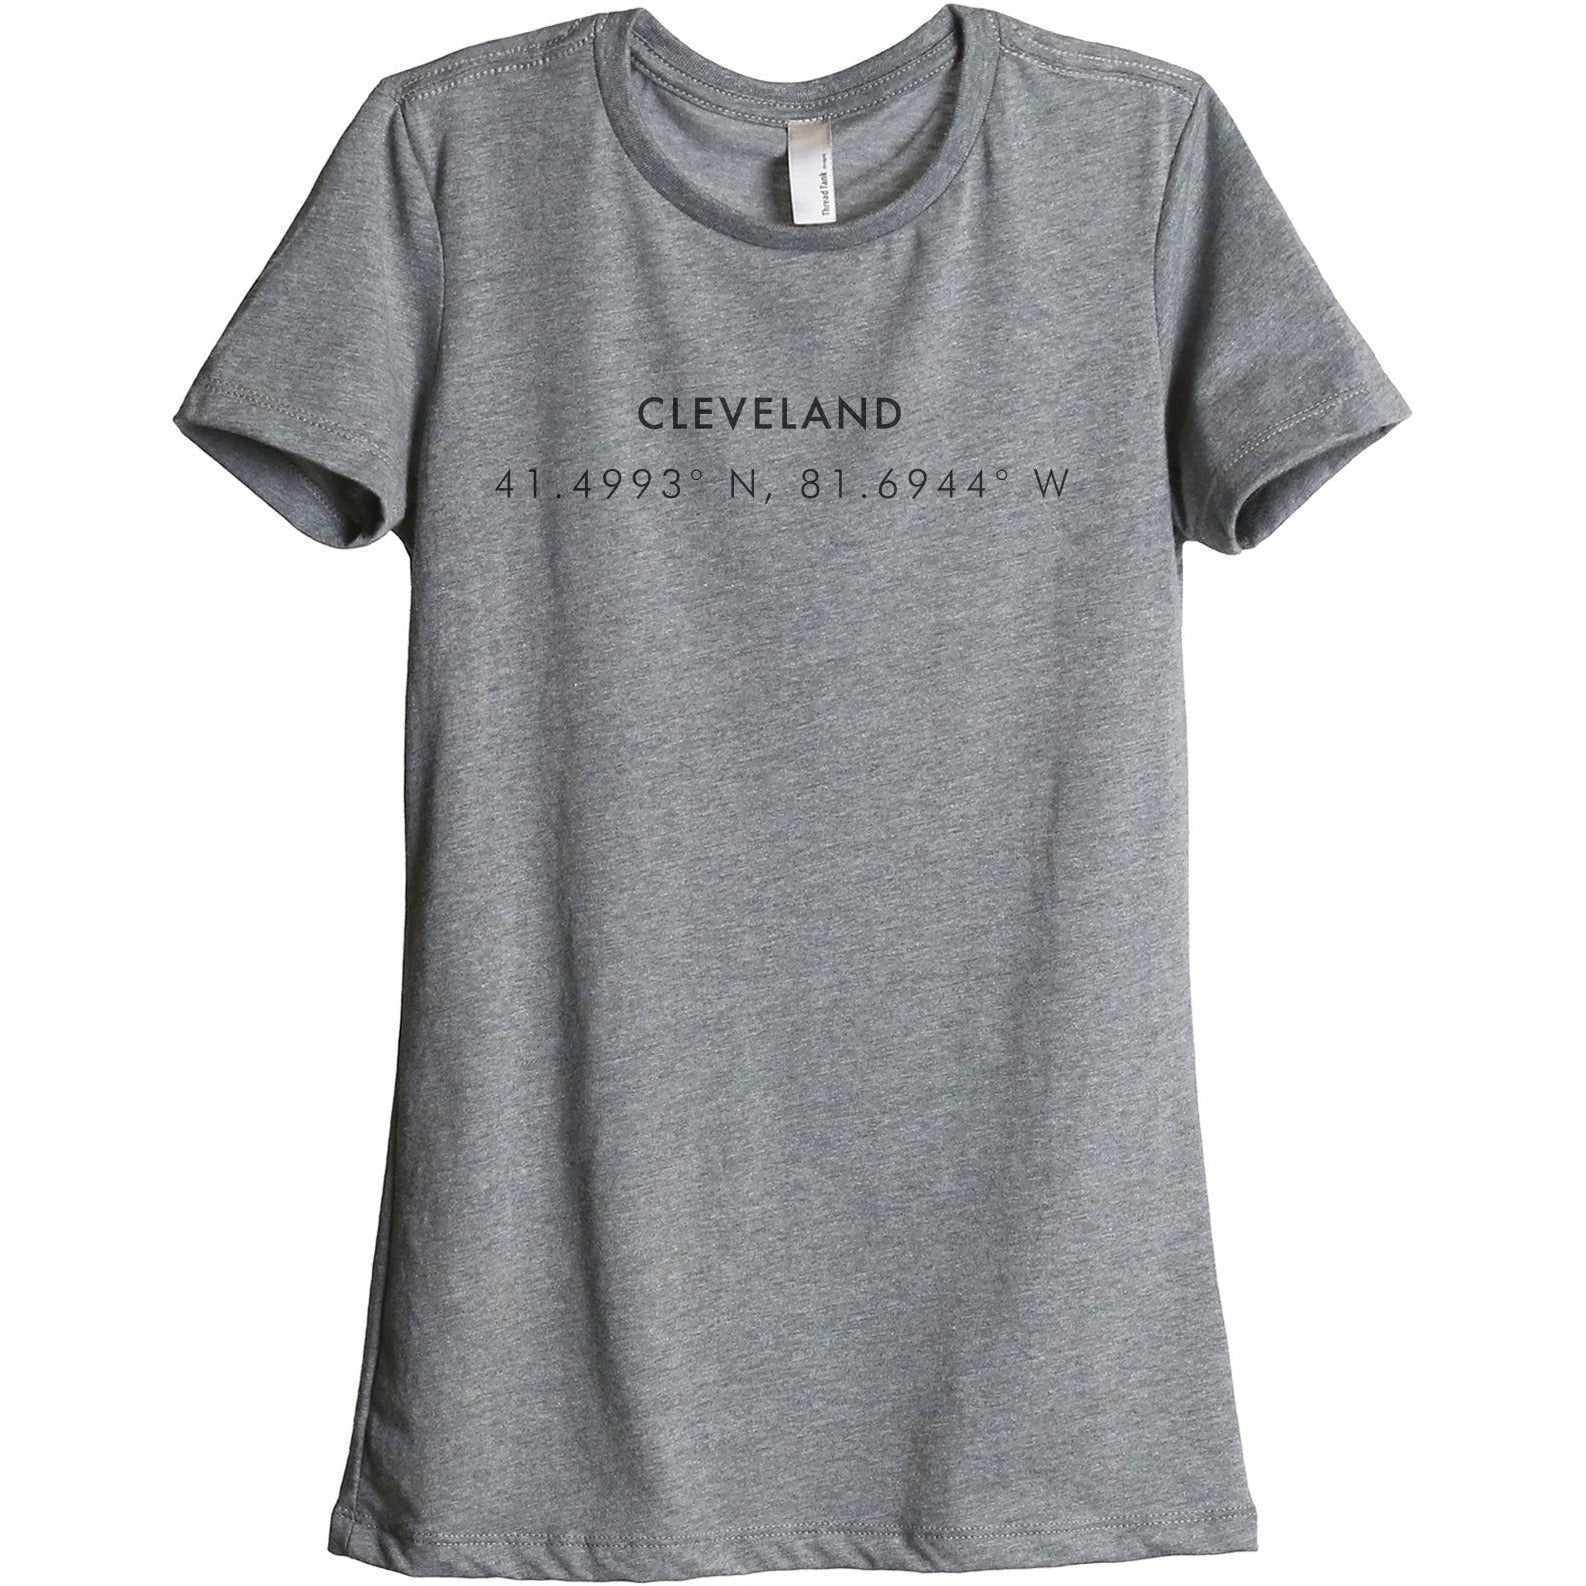 Cleveland Ohio Coordinates Women's Relaxed Crewneck T-Shirt Top Tee Heather Grey